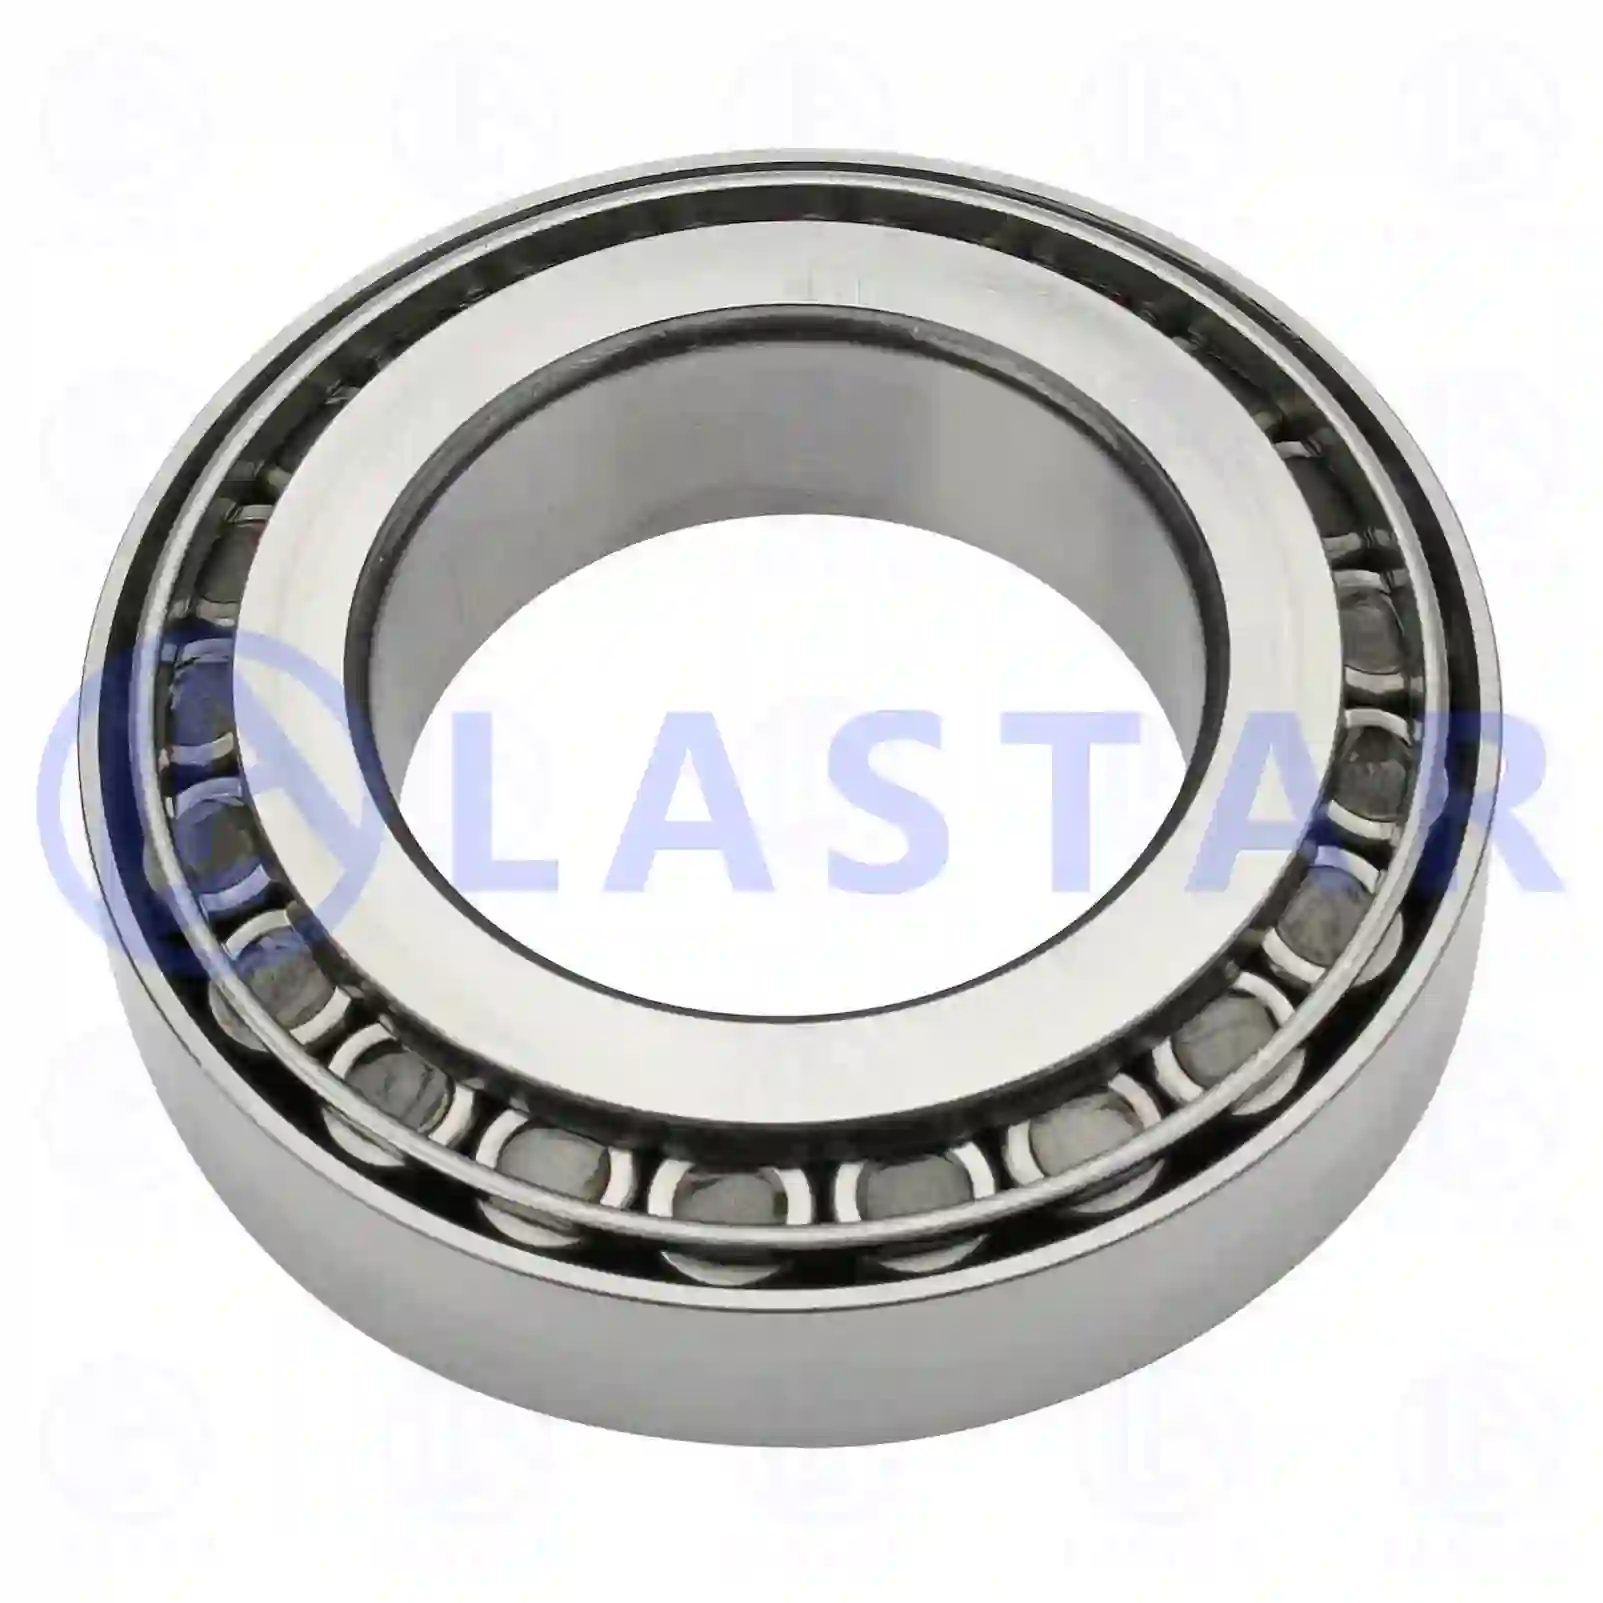 Bearings Tapered roller bearing, la no: 77725217 ,  oem no:000337133, 01103771, 94036574, 94057672, 94060942, 988475101, 988475101A, 1-09812044-0, 1-09812053-0, 1-09812153-0, 1-09812154-0, 1-09812168-0, 1-09812244-0, 9-00093161-0, 01103771, 1103771, 26800210, 06324901400, 06324990005, 06324990200, 81934206096, 87523301010, A0023432215, A0773221500, 996032215, 0009817405, 0009818405, 0019814805, 3279810305, 9429810205, MH043001, 01014-10584, 0023432215, 0773221500, 0959232215, 5000588934, 14102, 177893, 97699-32215, 11066, 2V5609747Q Lastar Spare Part | Truck Spare Parts, Auotomotive Spare Parts